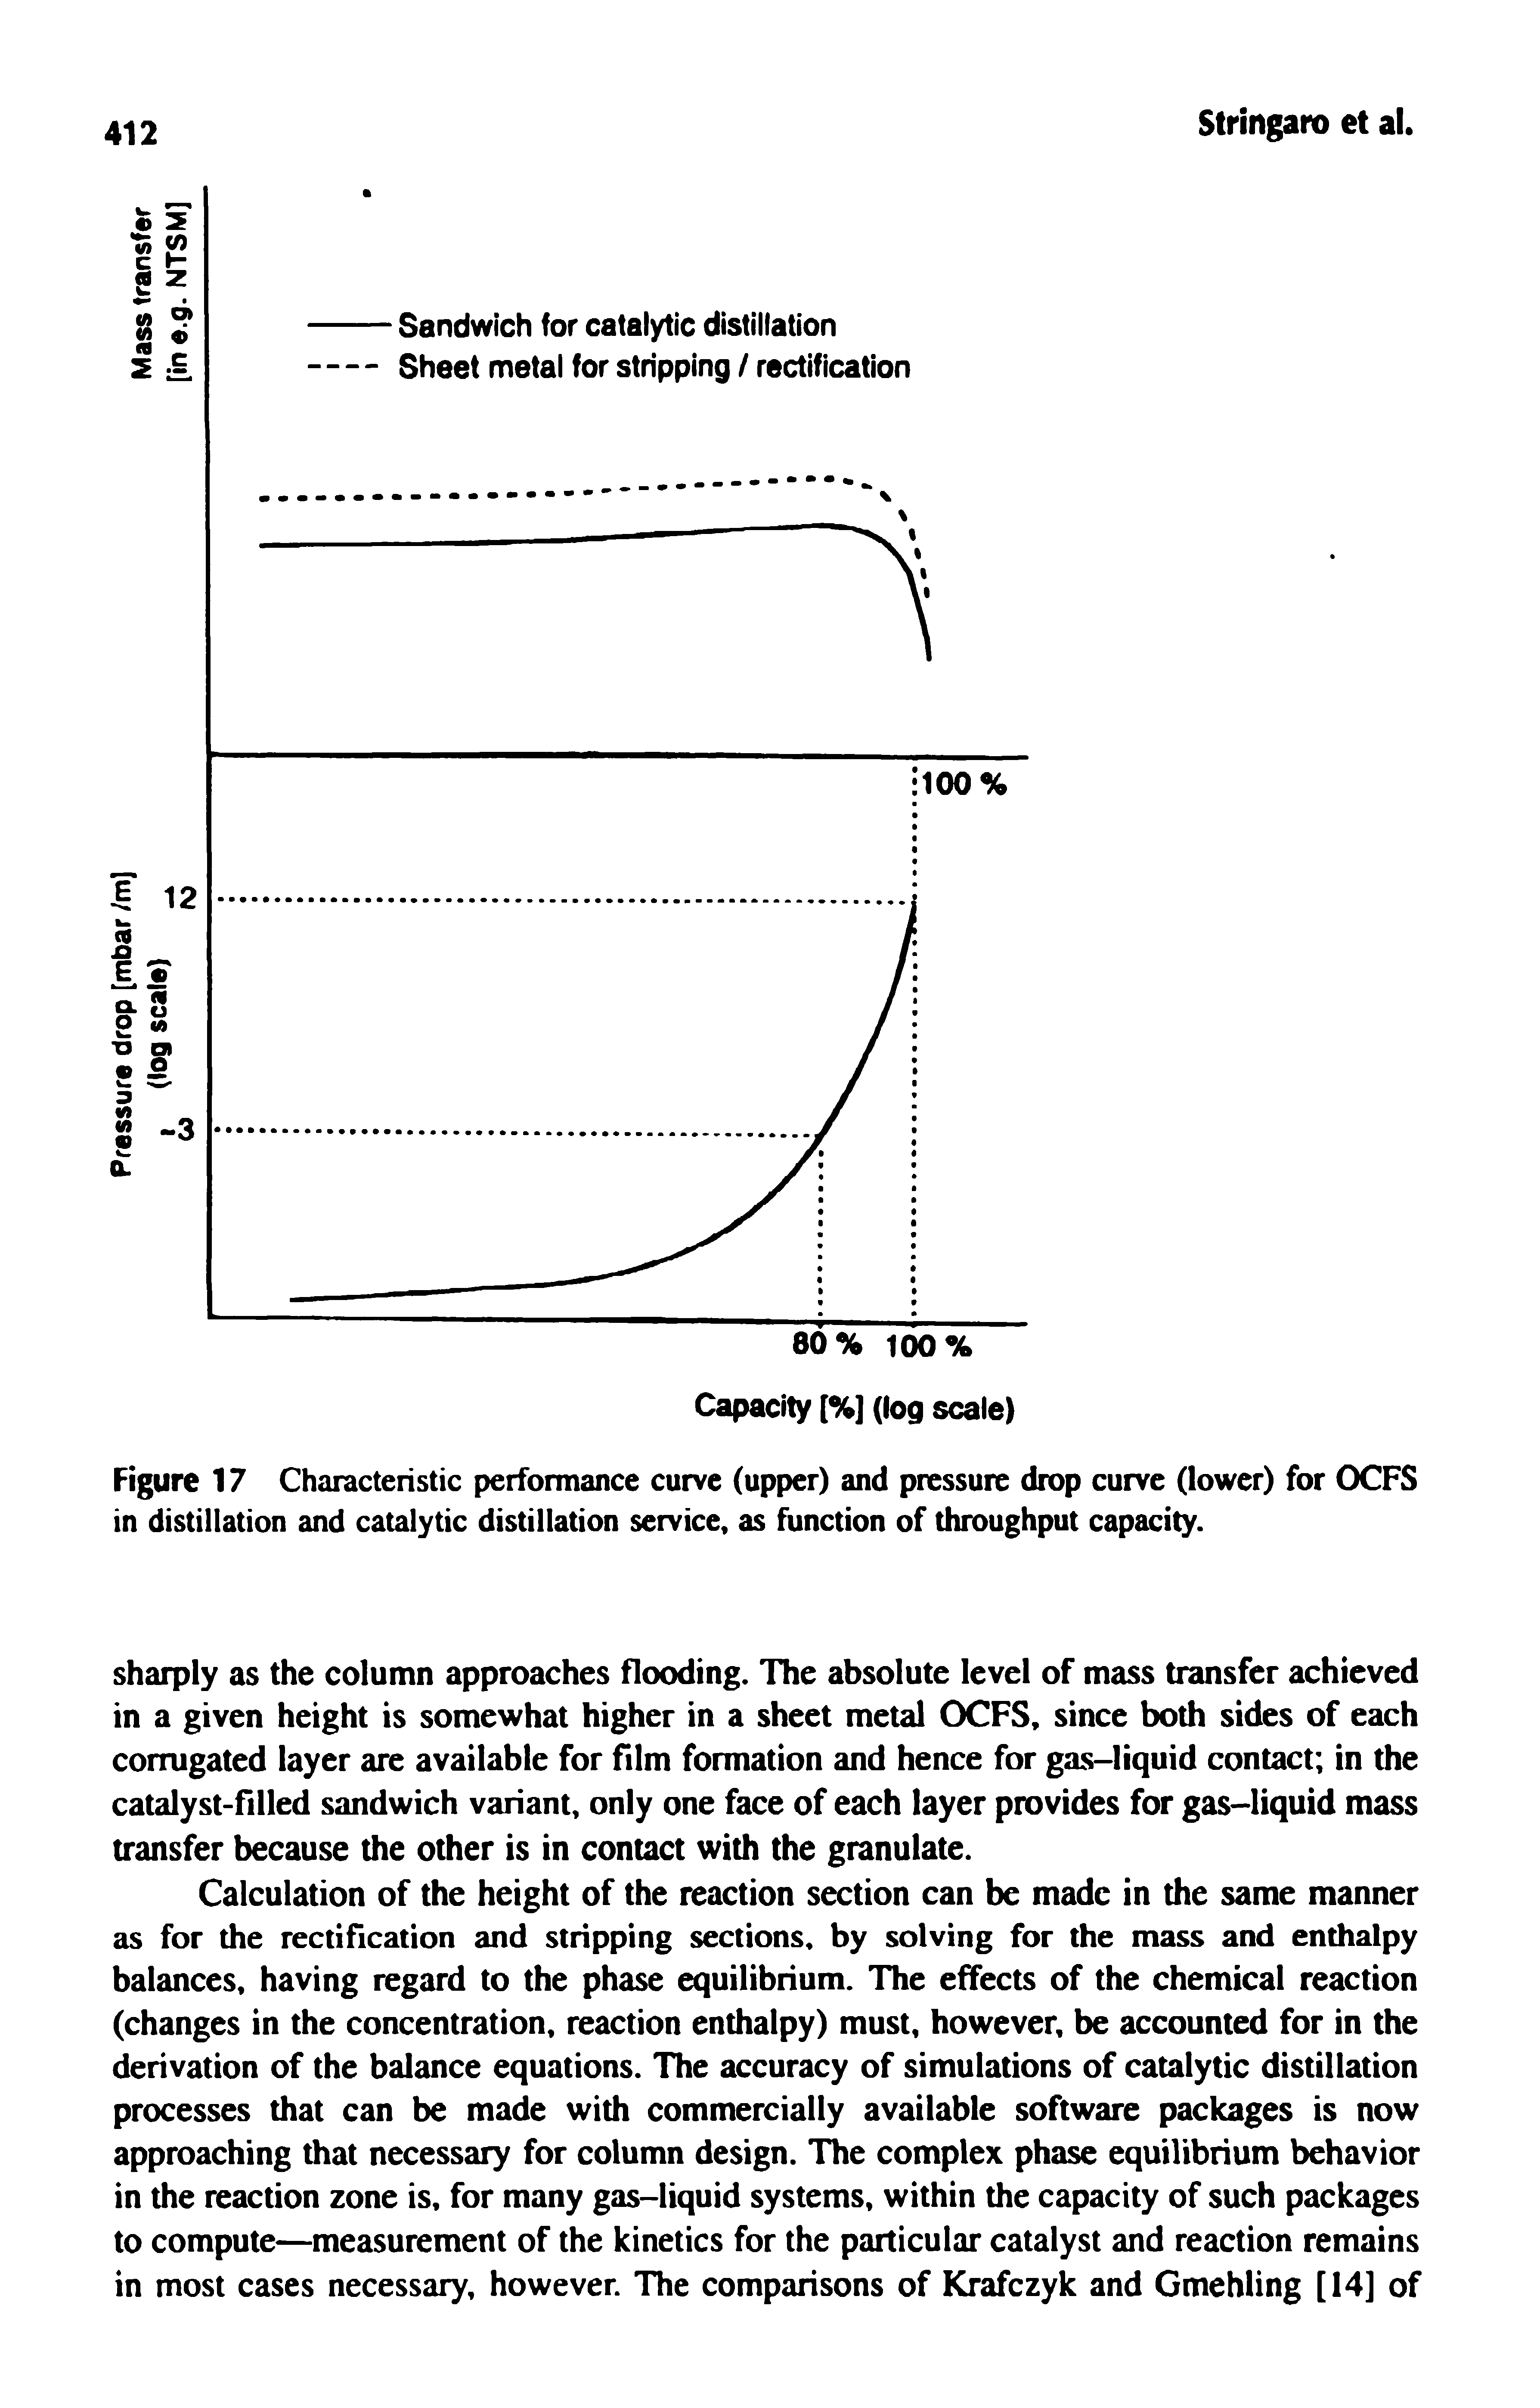 Figure 17 Characteristic performance curve (upper) and pressure drop curve (lower) for OCFS in distillation and catalytic distillation service, as function of throughput capacity.